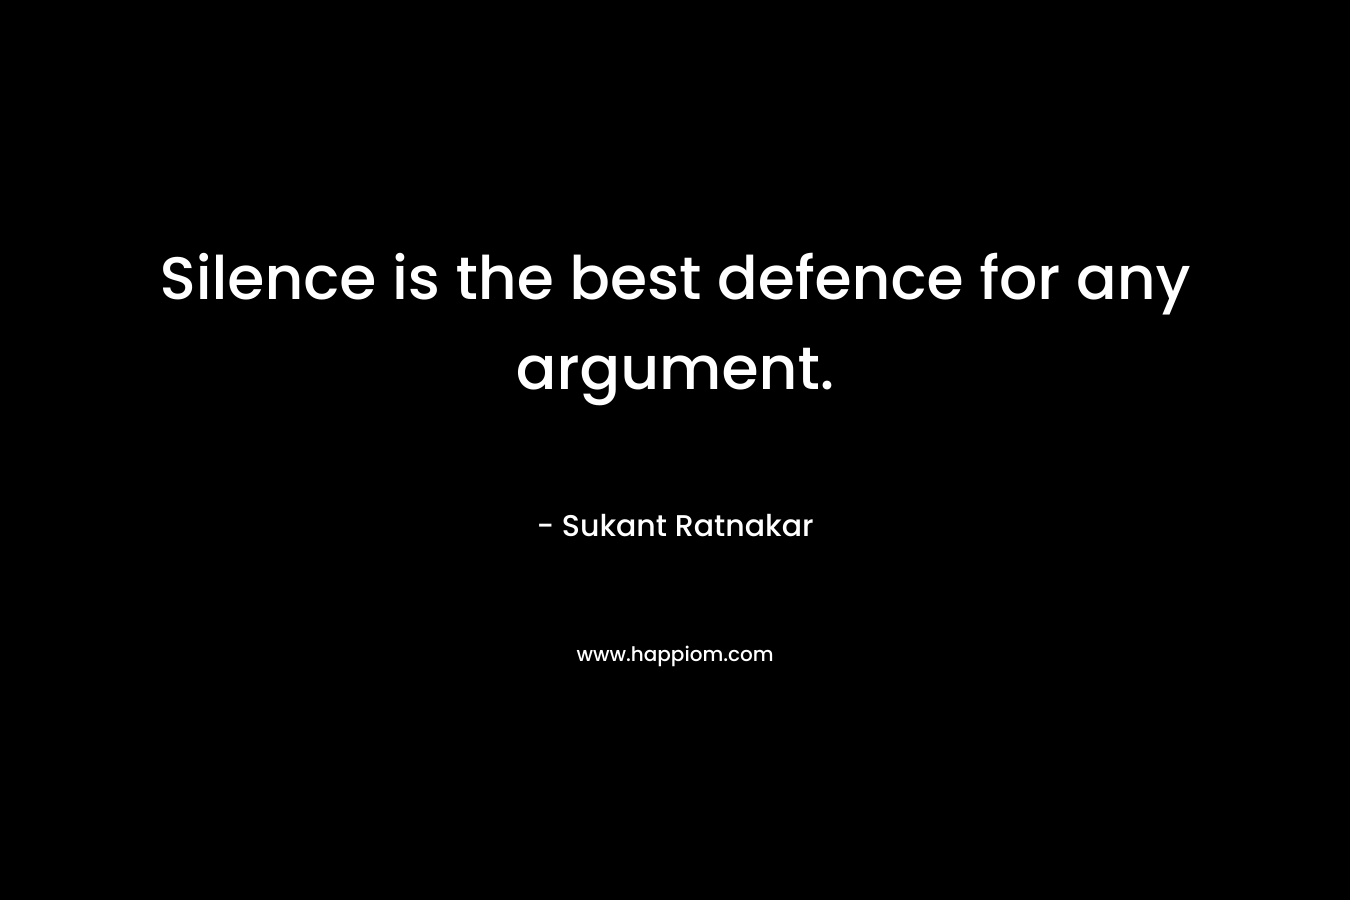 Silence is the best defence for any argument. – Sukant Ratnakar